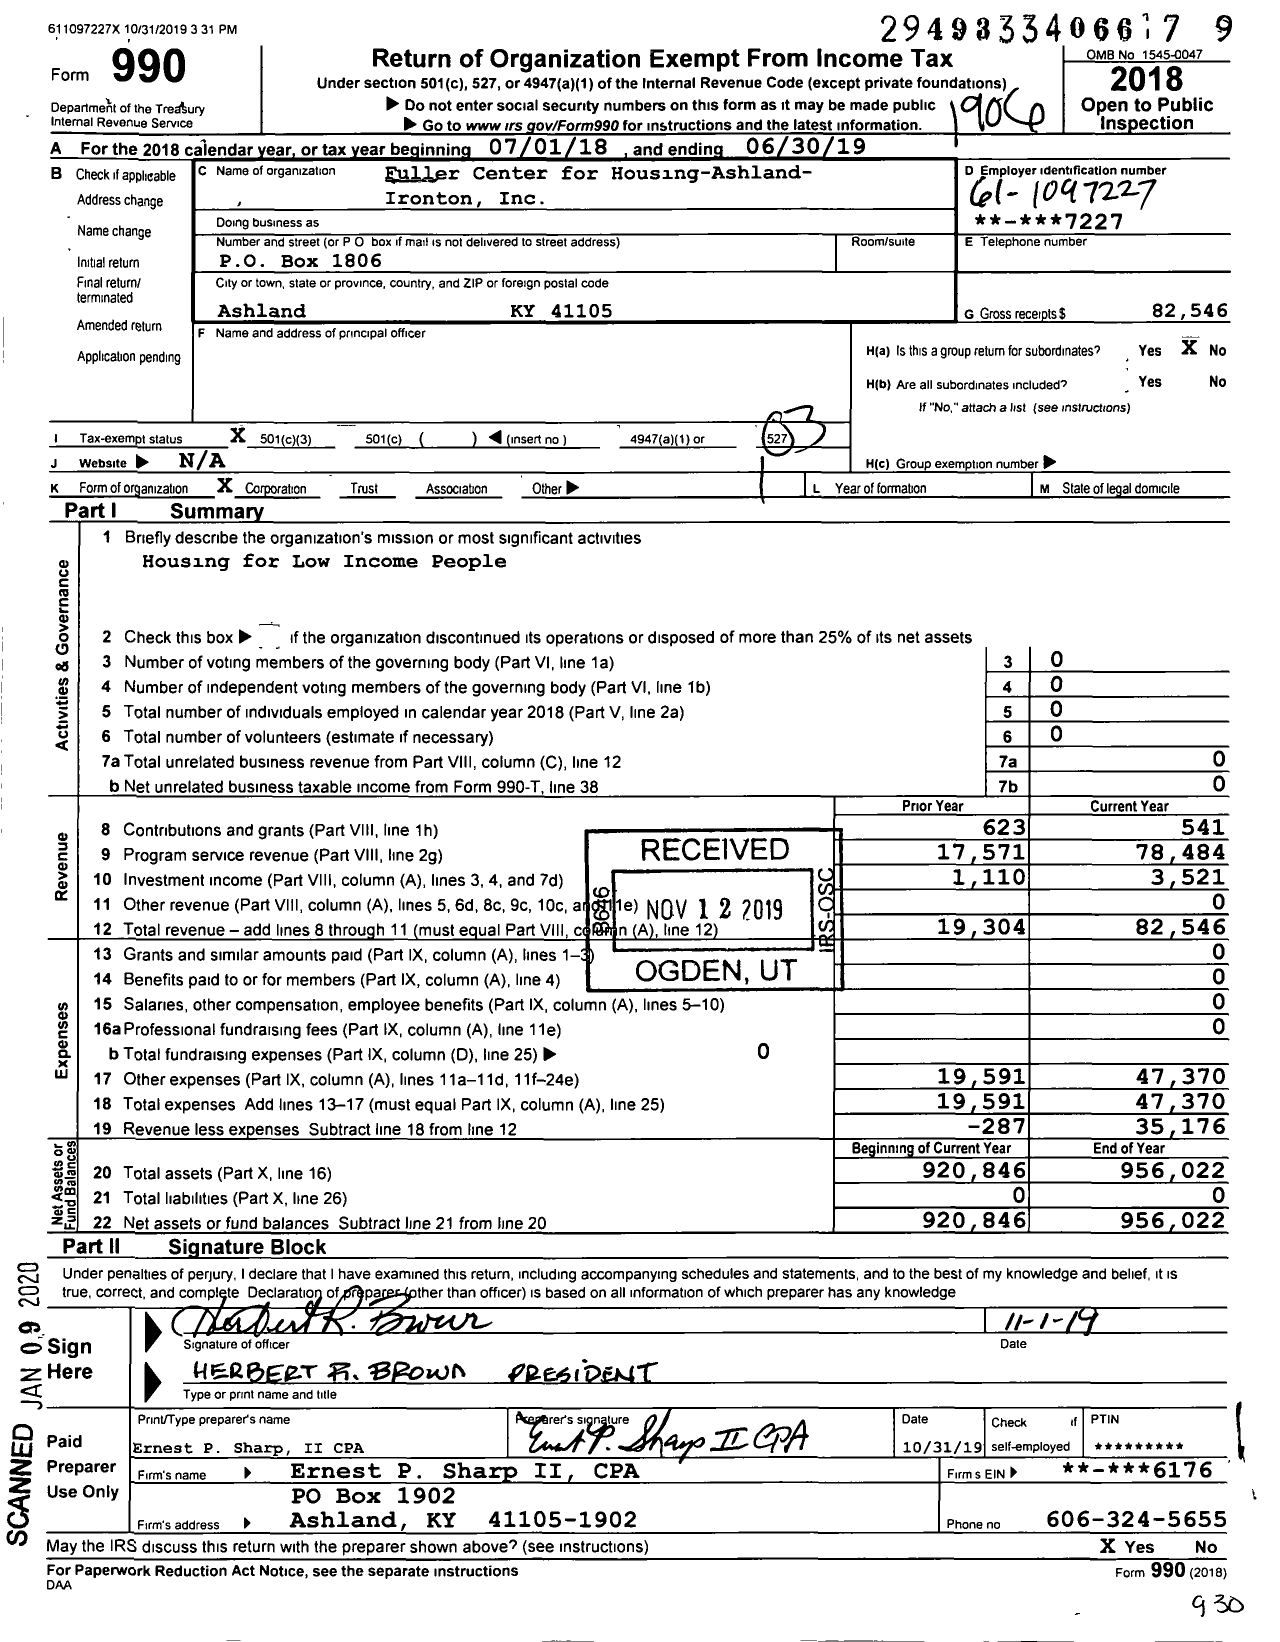 Image of first page of 2018 Form 990 for Fuller Center for Housing-Ashland- Ironton